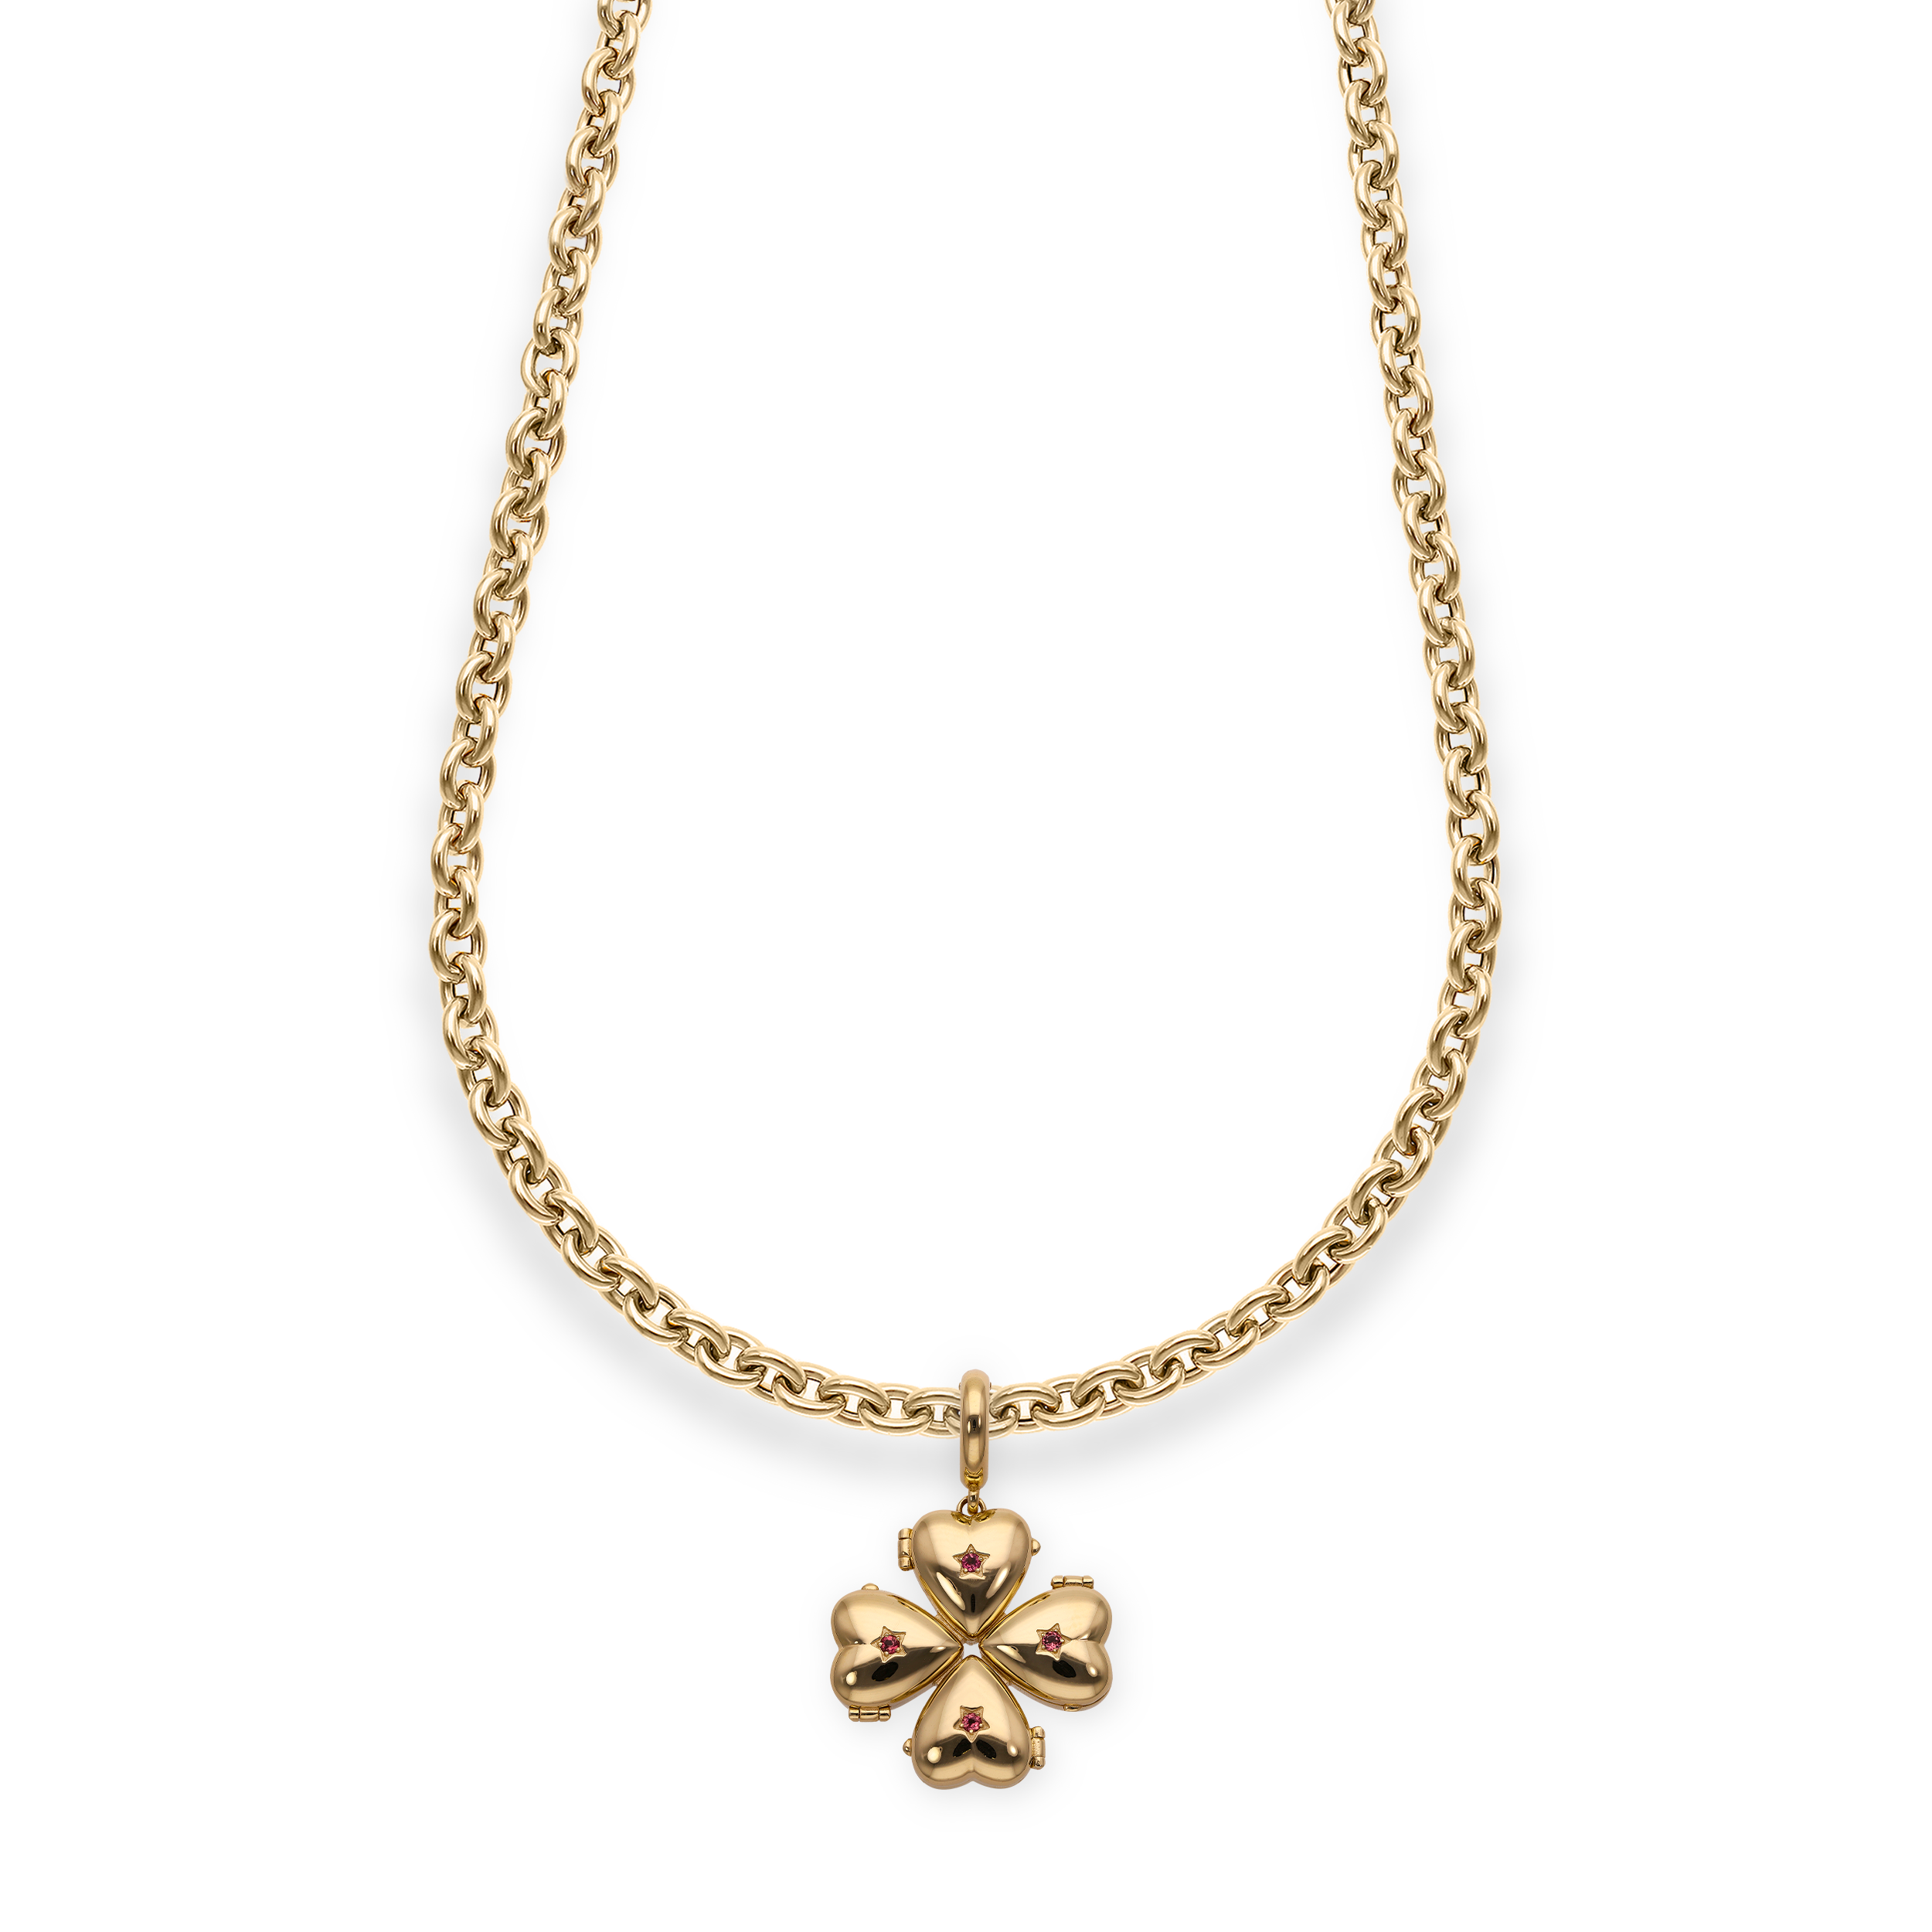 Bruno Yellow Gold and Tourmalines "Secret" Clover Pendant on Long Chain